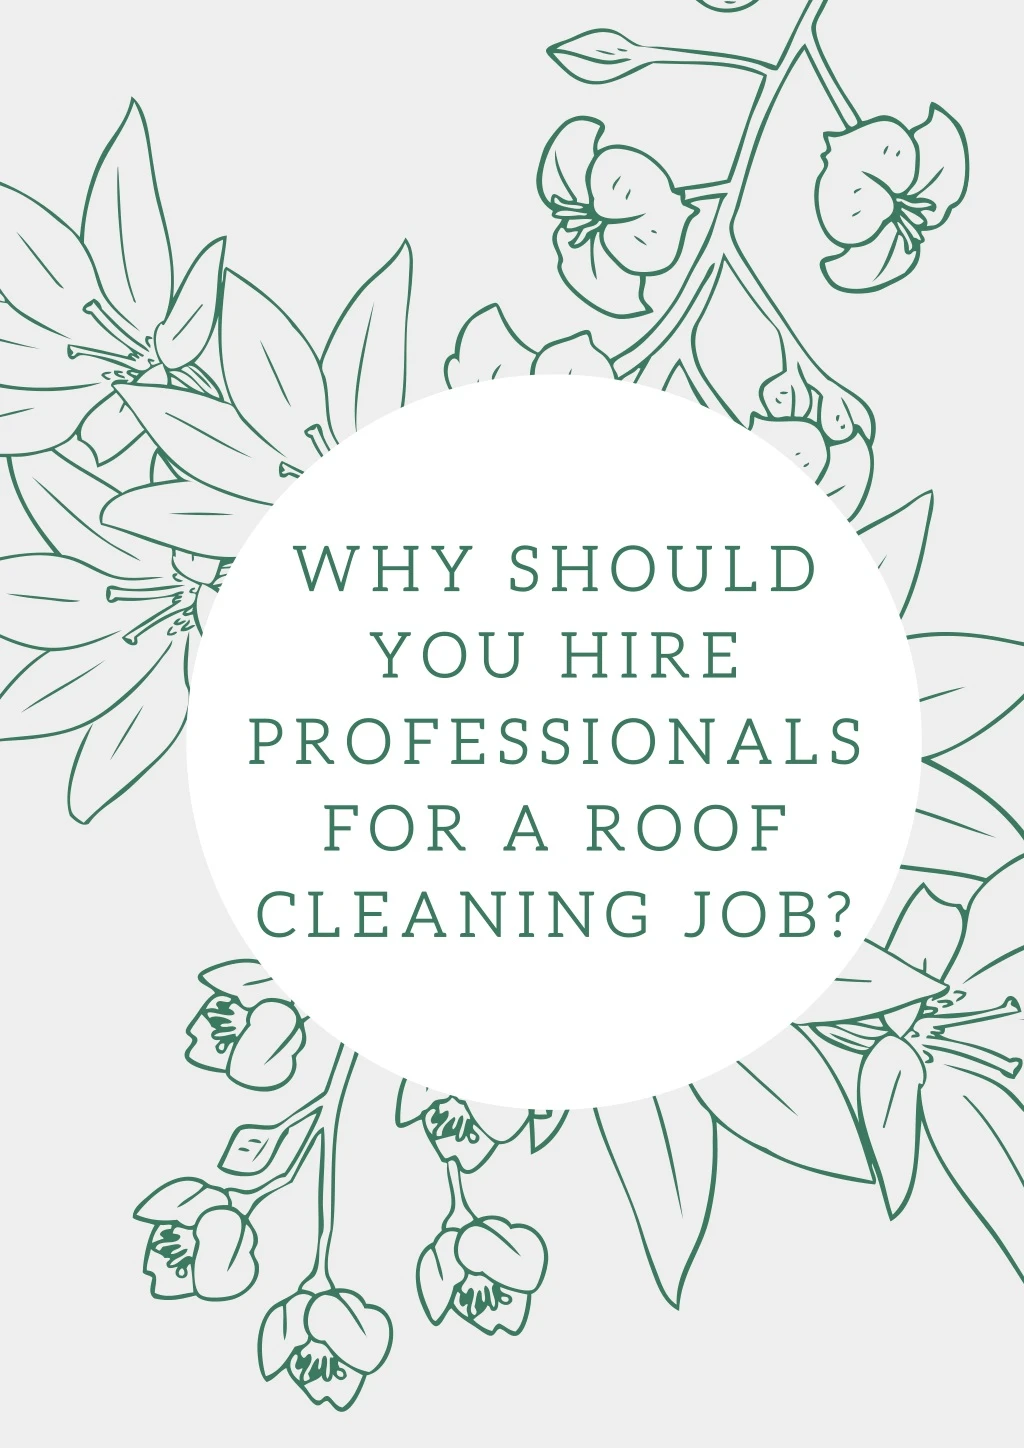 why should you hire professionals for a roof